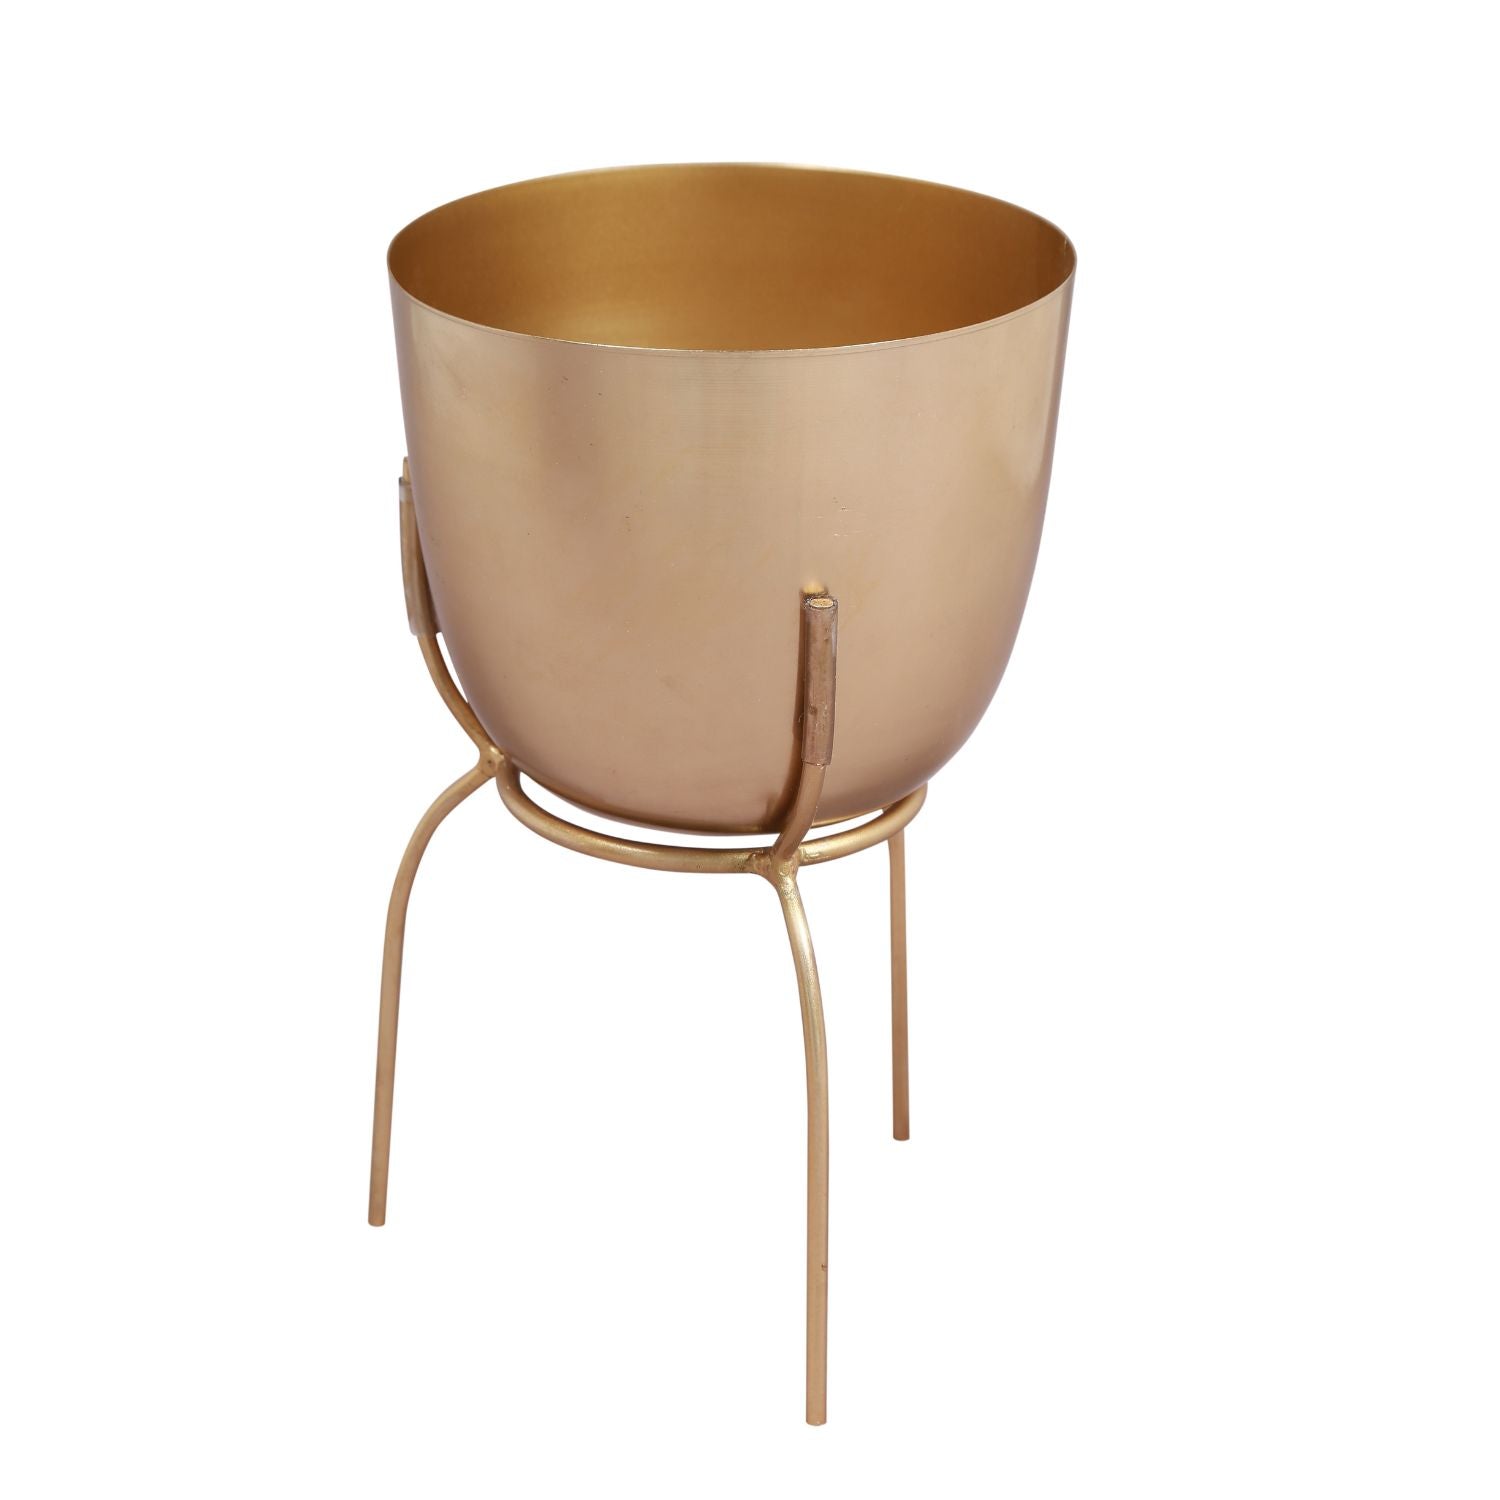 Golden Metal Planter with Stand 12 inch tall